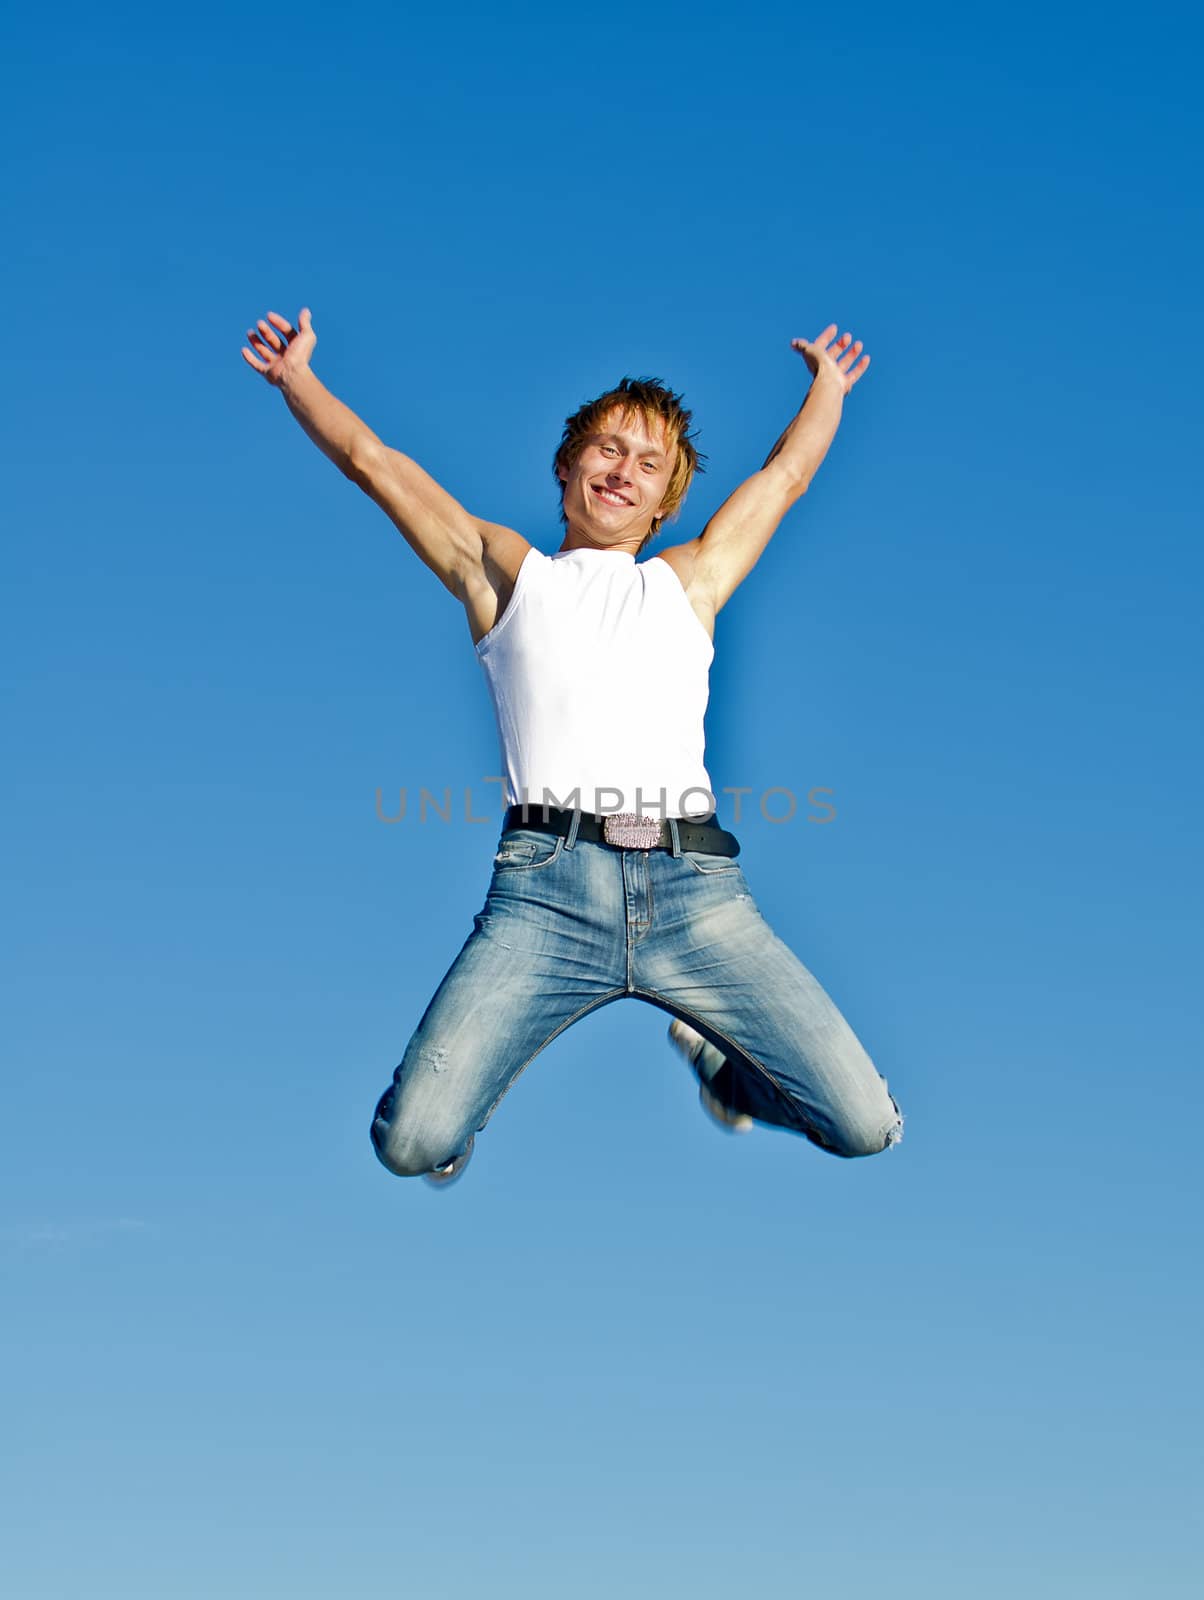 Happy jumping man on blue sky background